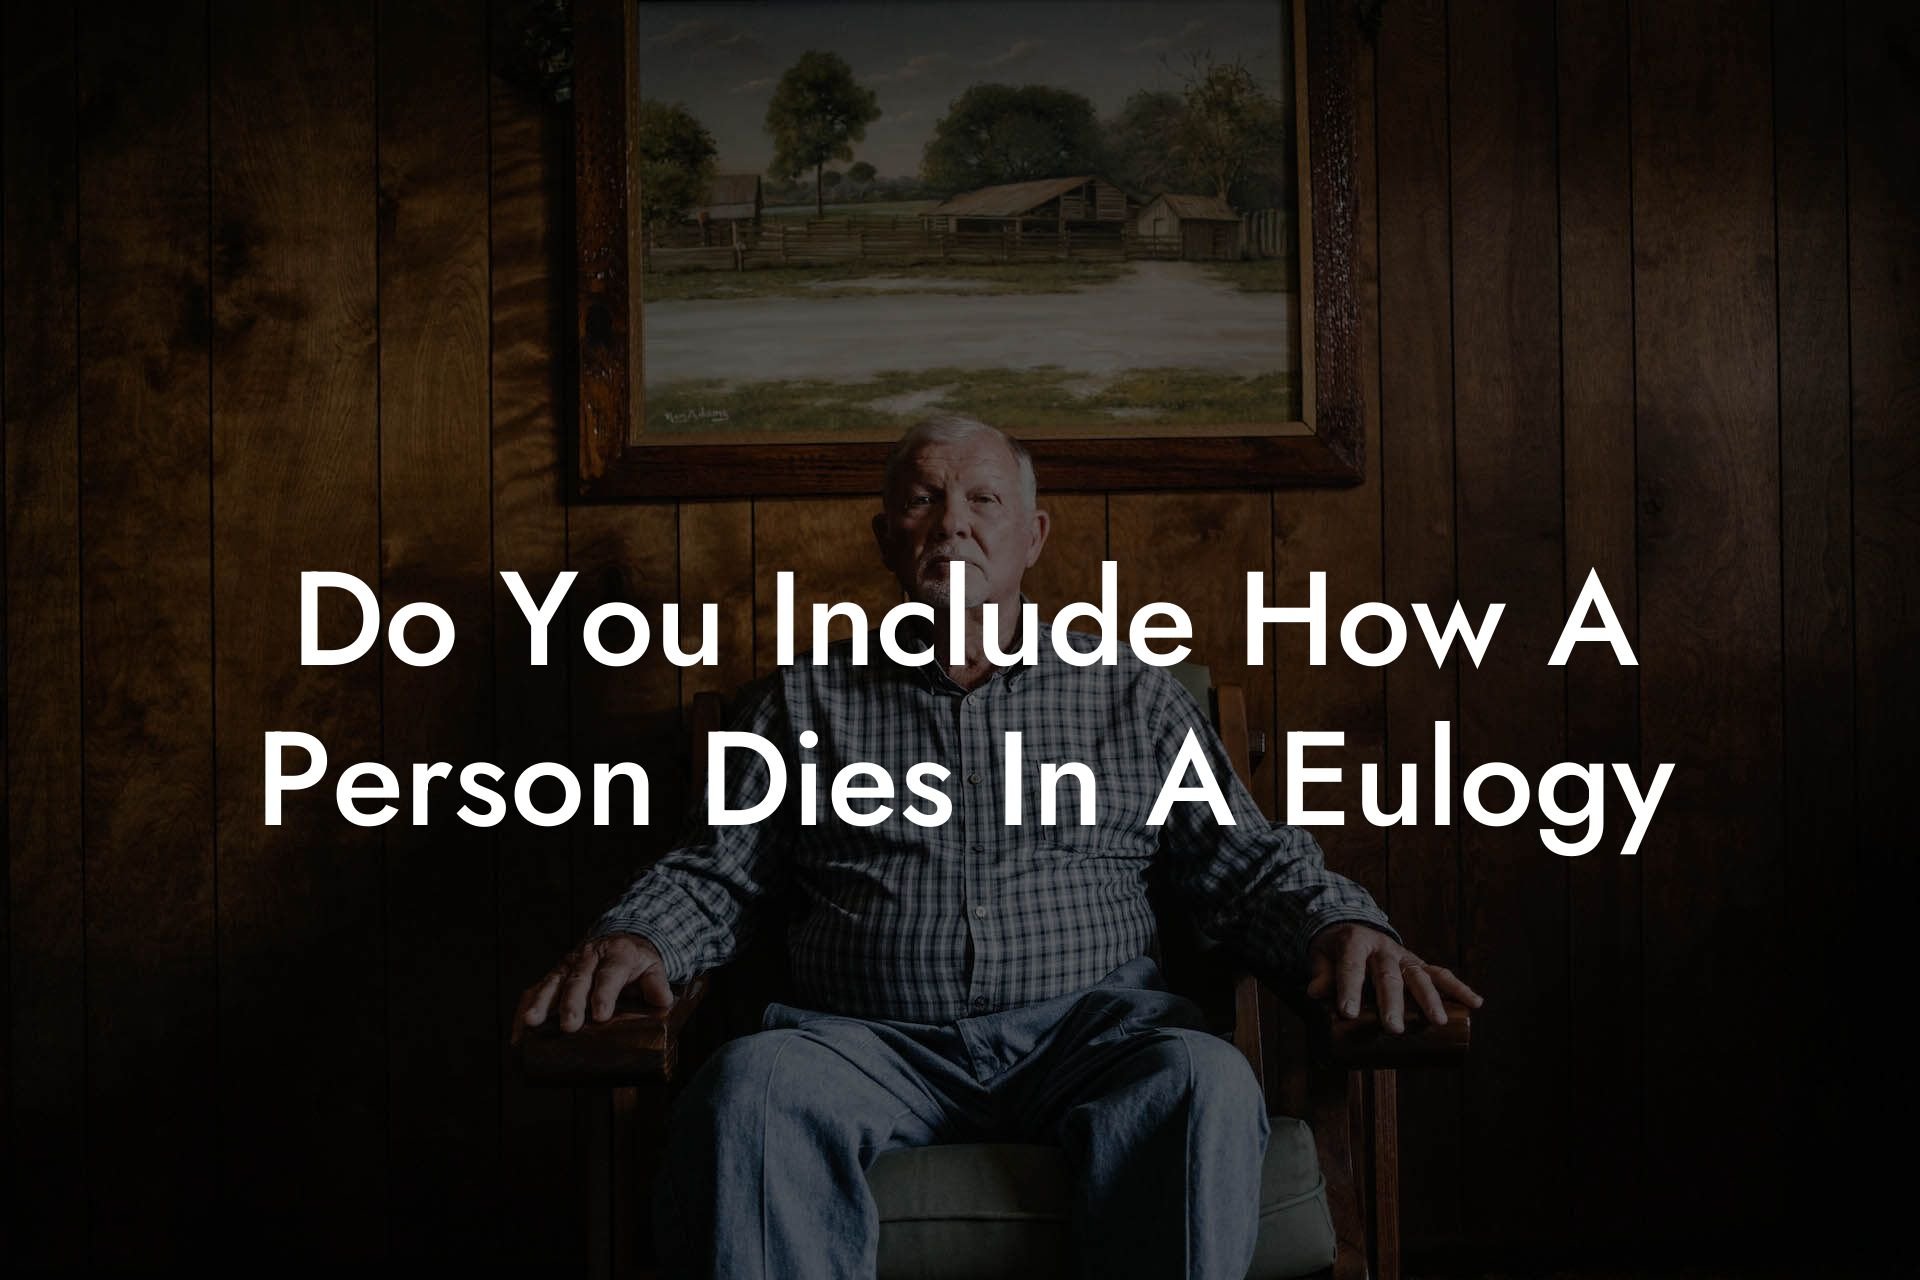 Do You Include How A Person Dies In A Eulogy